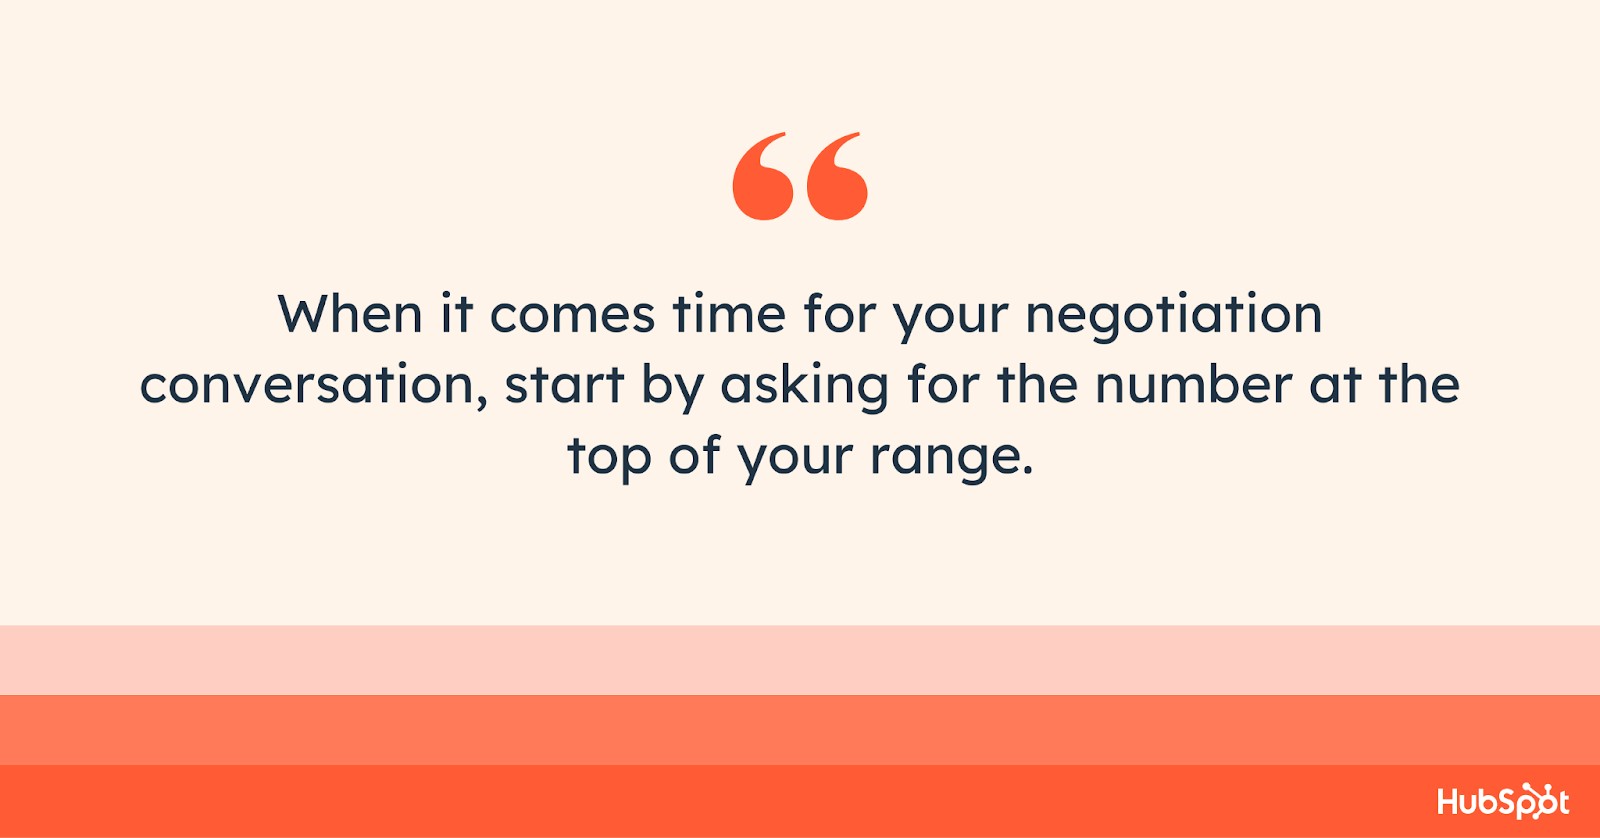 When it comes time for your negotiation conversation, ask for the number at the top of your range.